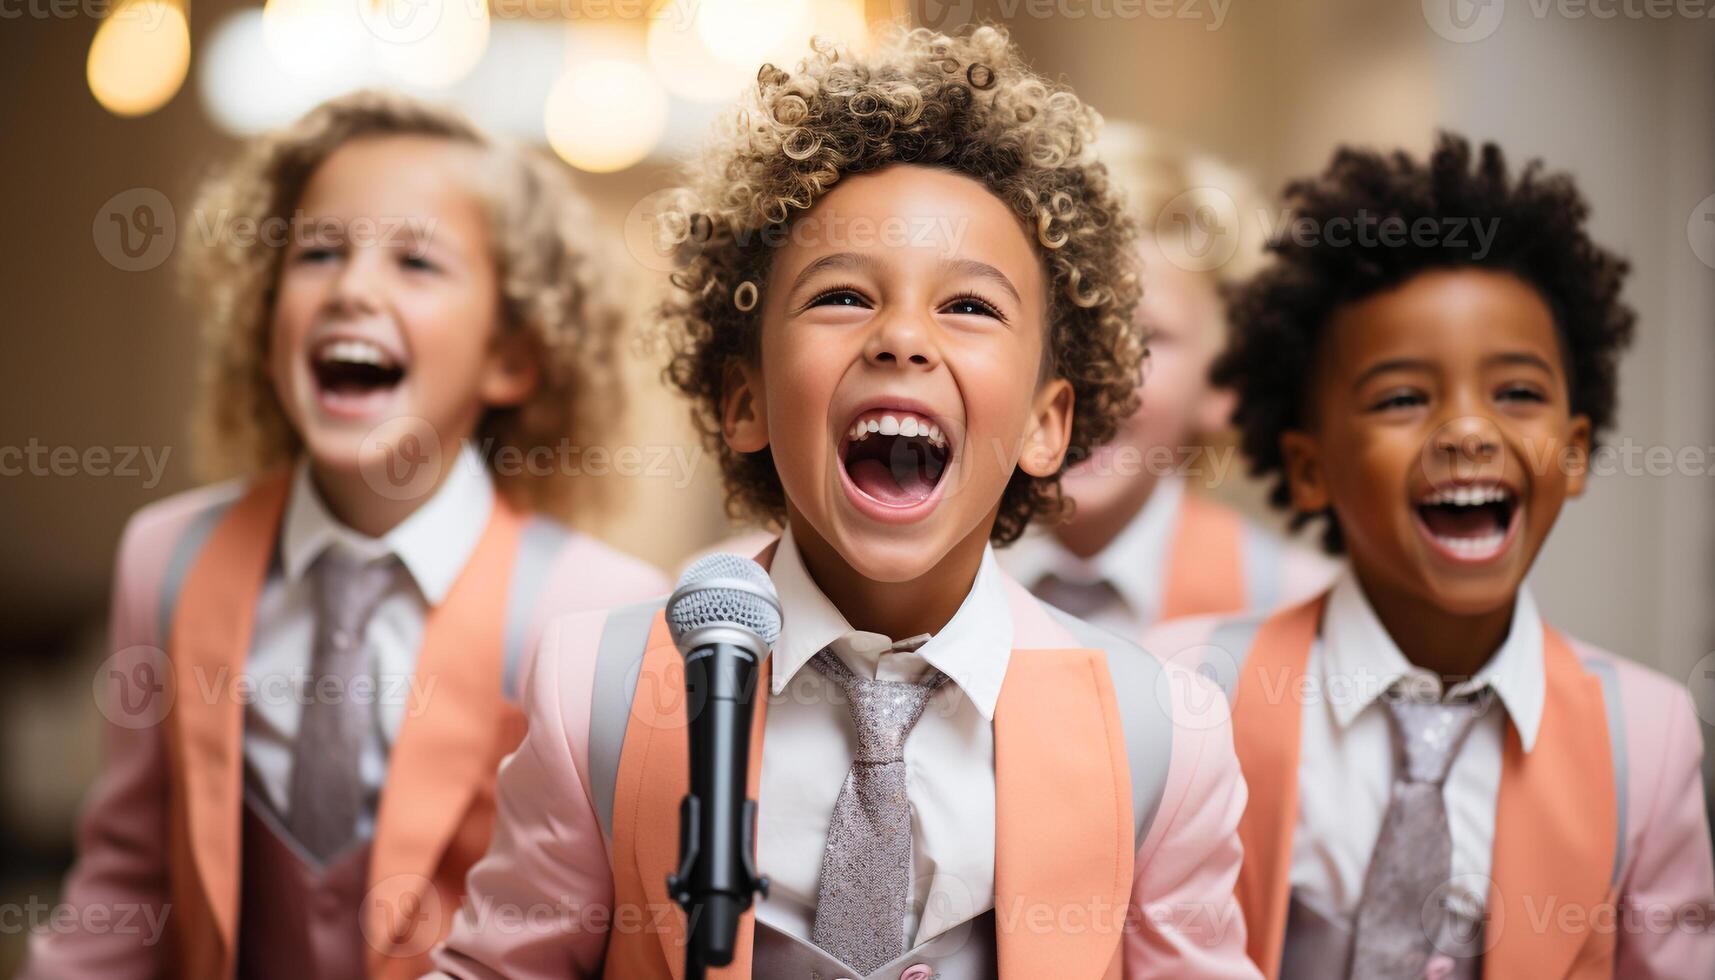 AI generated Smiling children singing, joyful musician on stage, group of friends generated by AI photo